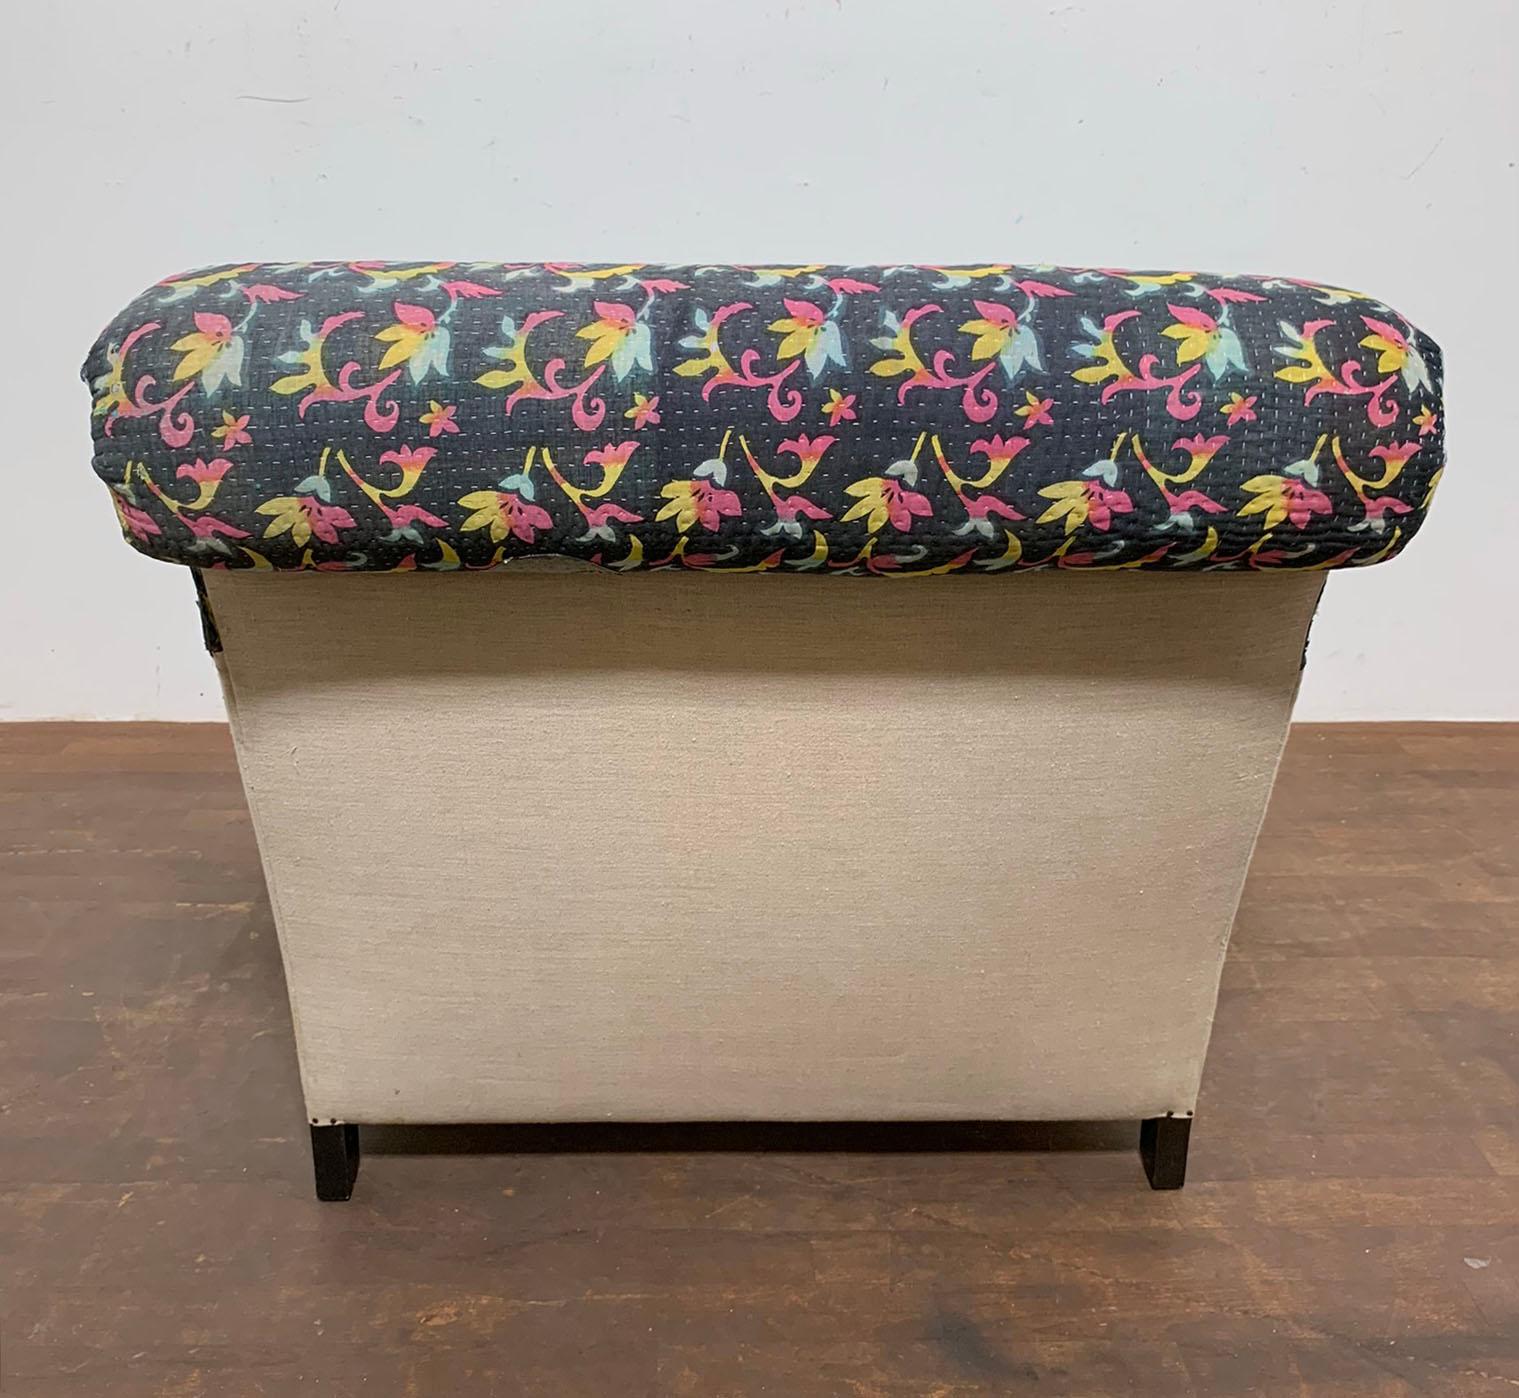 Contemporary Cisco Brother's Acacia Lounge Chair in Vintage Quilt Upholstery